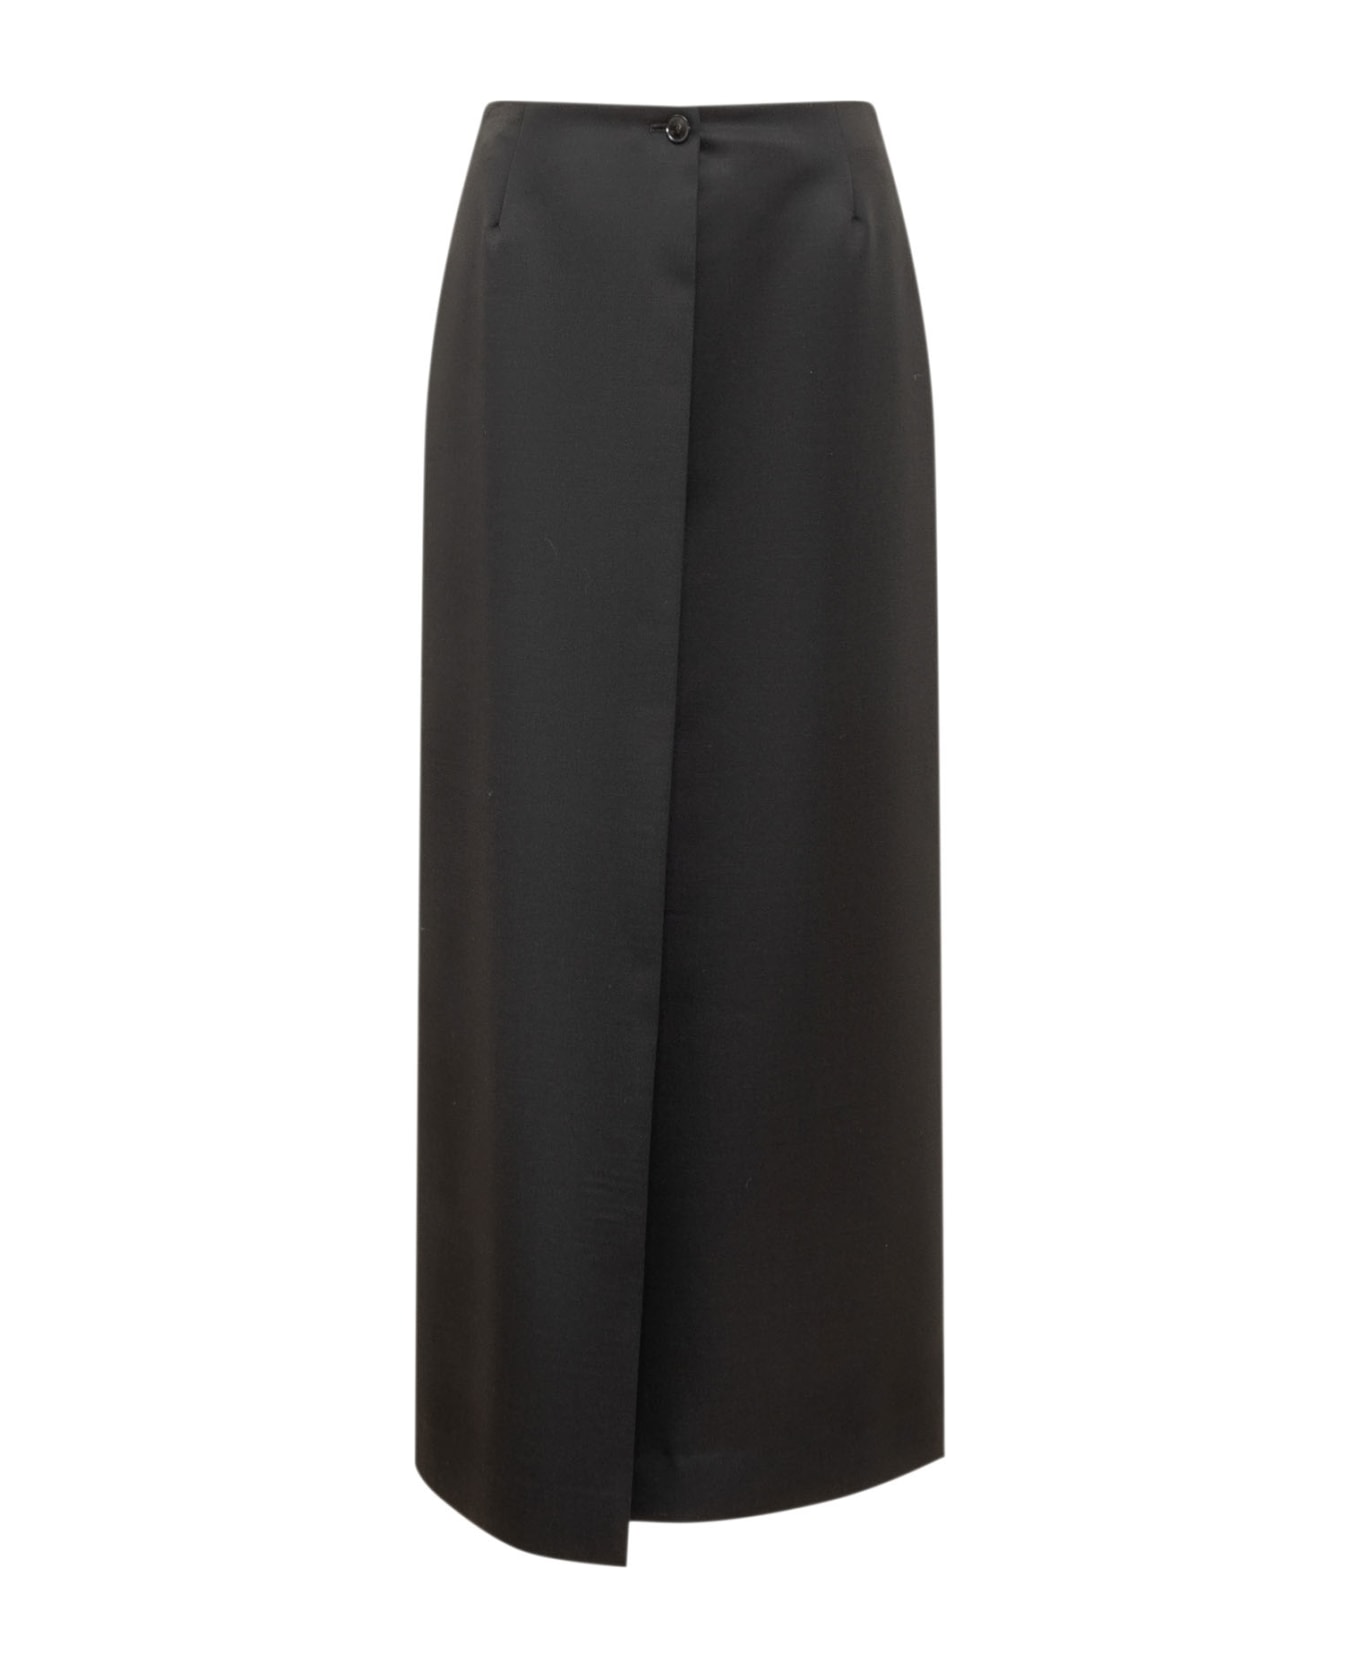 Givenchy Wool And Mohair Skirt - Black